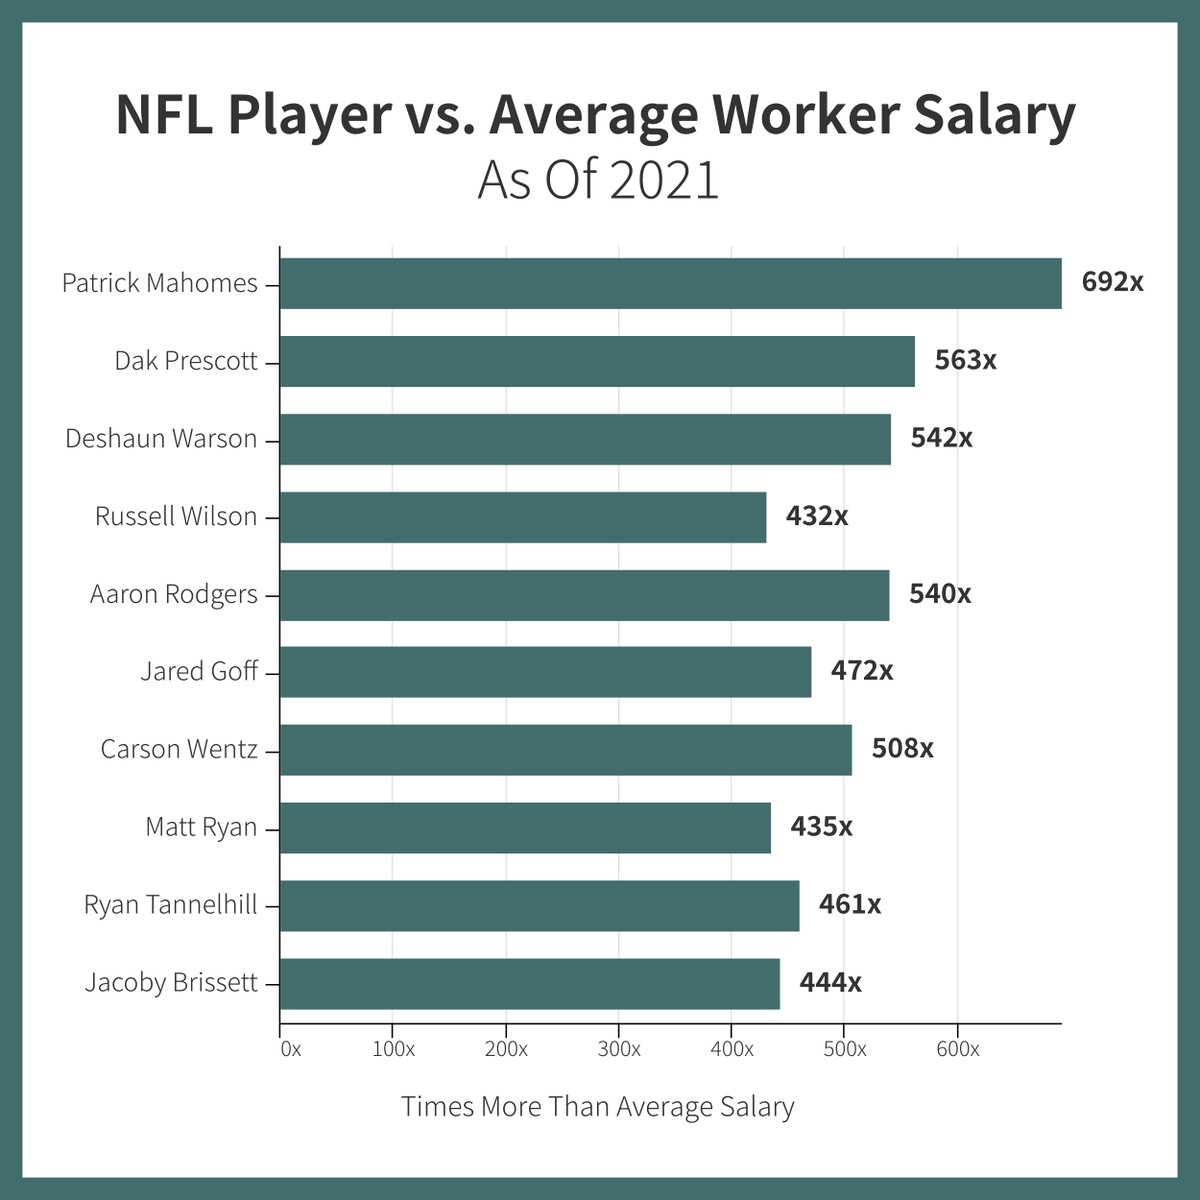 One of the top paid players in the NFL, Patrick Mahomes, will make $45 million this year JUST in salary. That doesn't take into account his endorsements & other investments. But even without the extra money he will make 692x MORE each year than an average Kansas City worker.